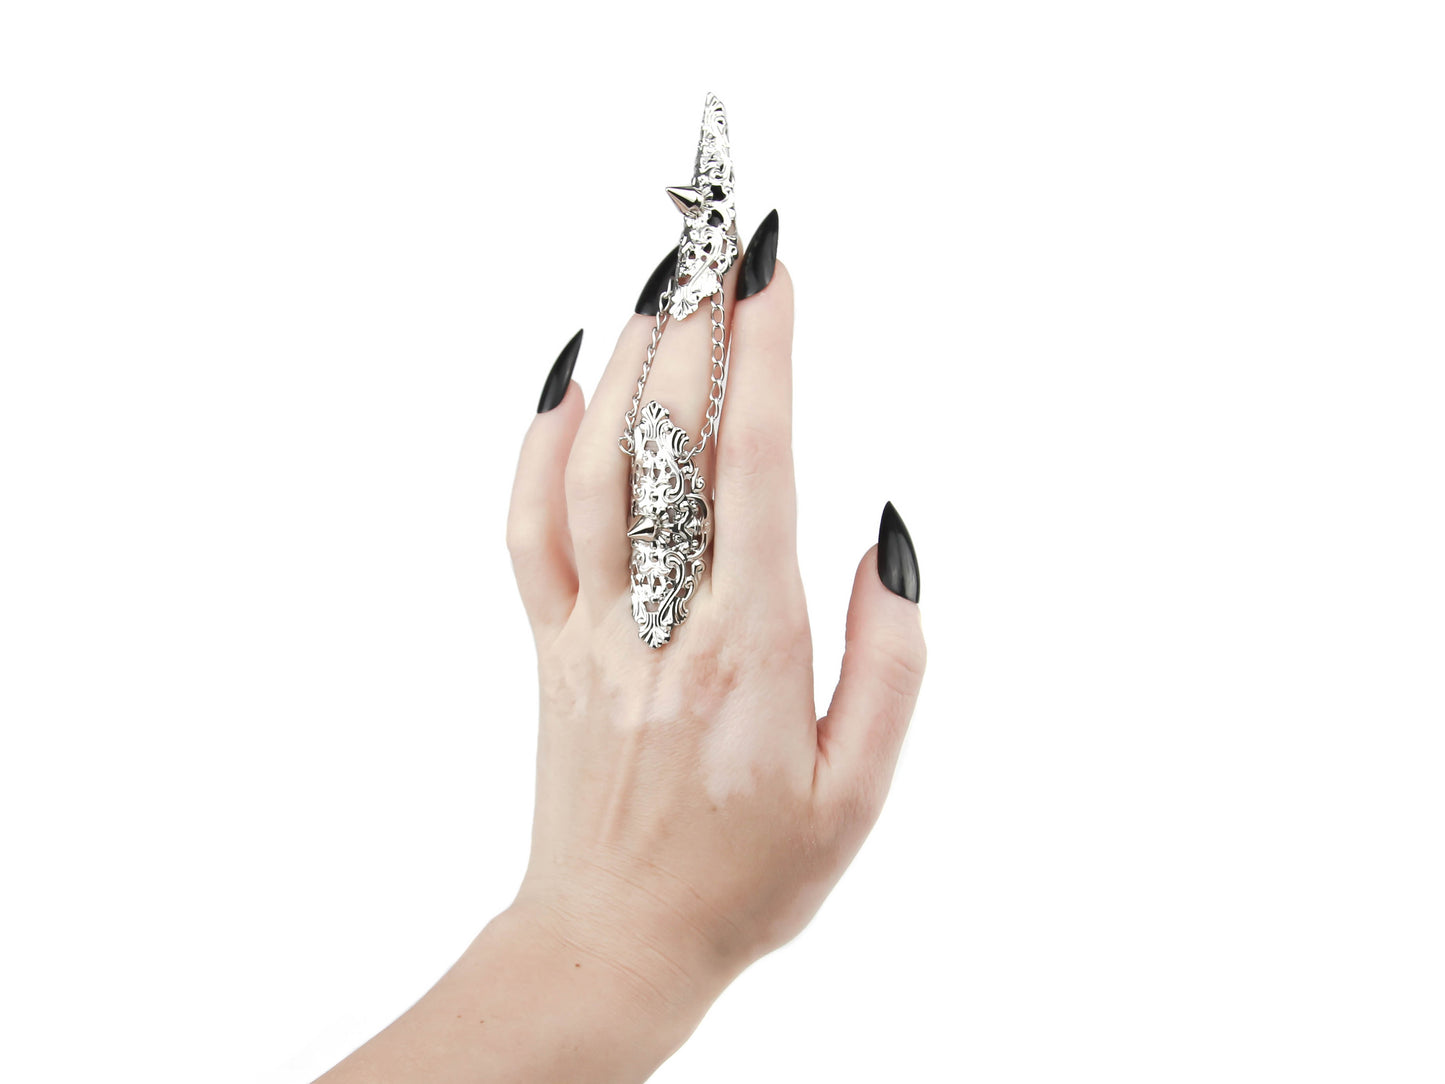 Captured is a Myril Jewels studded claw ring, a bold and intricate accessory that embodies neo-gothic design. Adorning the middle finger, its detailed craftsmanship highlights a dark, avant-garde aesthetic, making it a perfect match for gothic and alternative fashion enthusiasts. Ideal for enhancing Halloween outfits, adding edge to everyday wear, or as a statement piece at a rave or festival, this ring is a hallmark of Myril's unique, handcrafted jewelry collection.